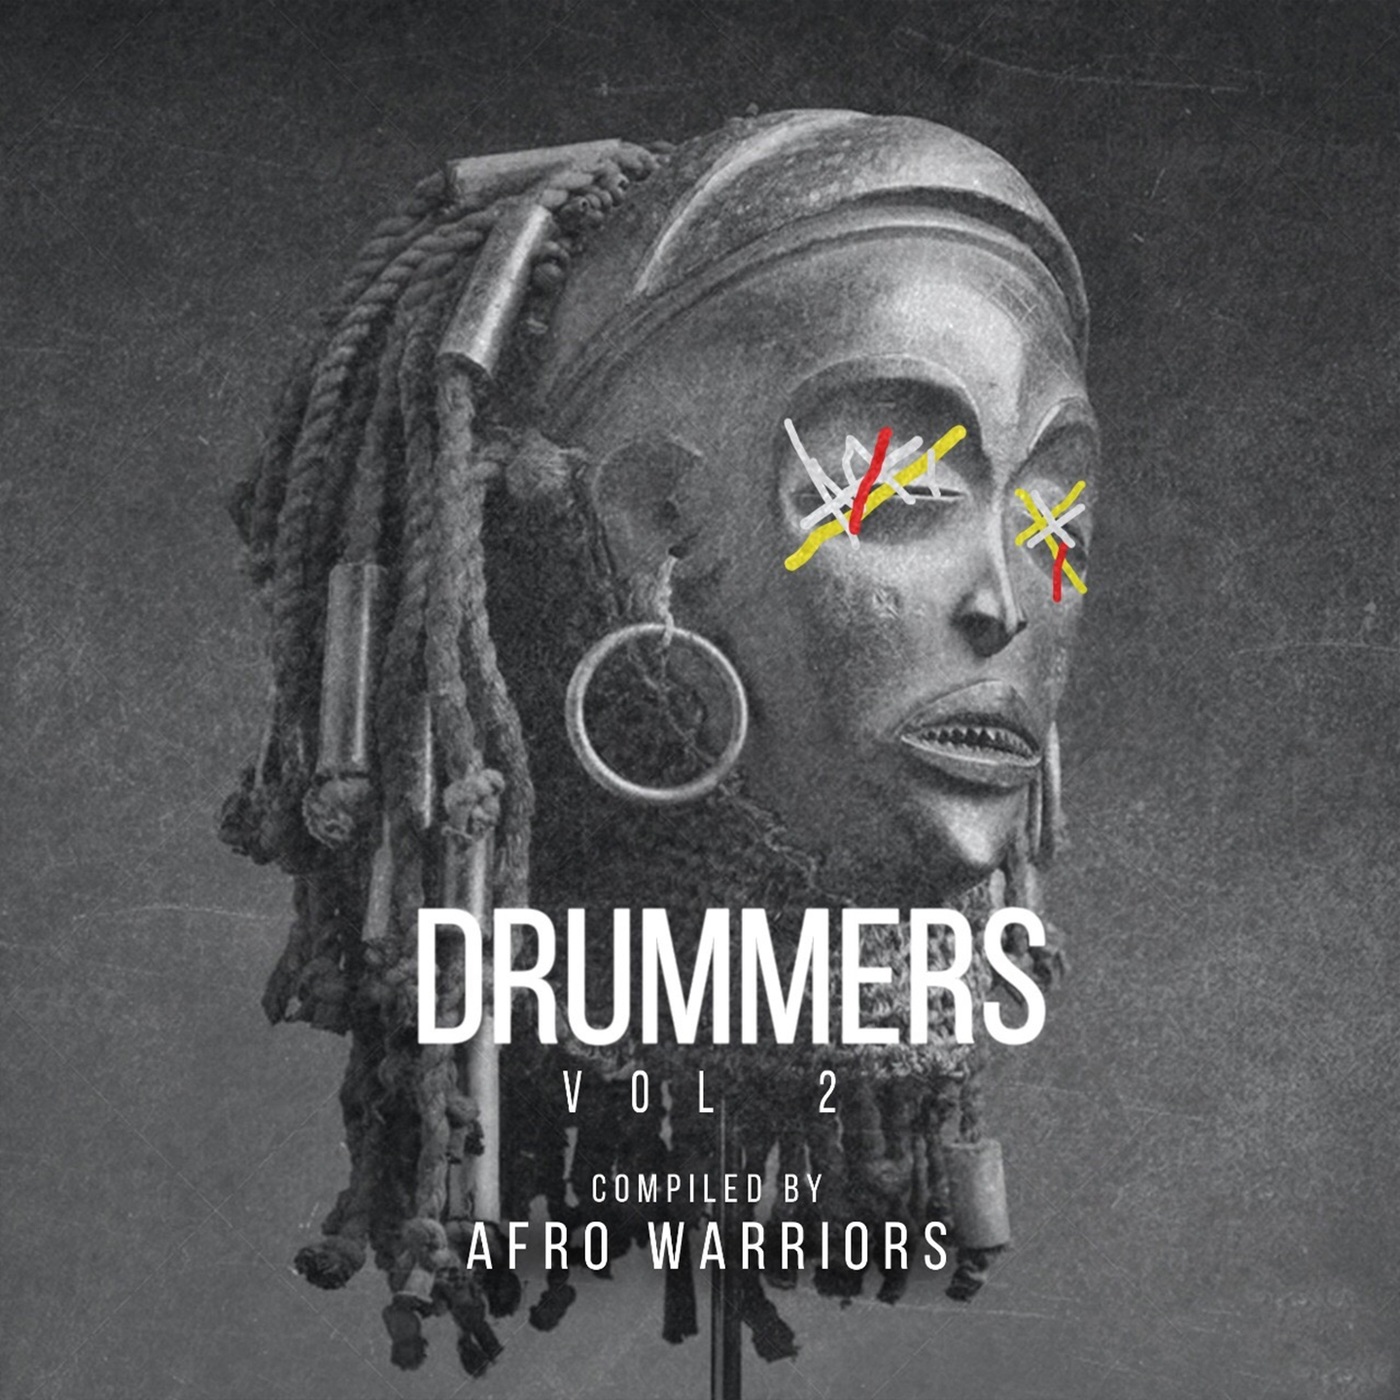 VA - Drummers, Vol. 2 (Compiled by Afro Warriors) / Black Buddha Music